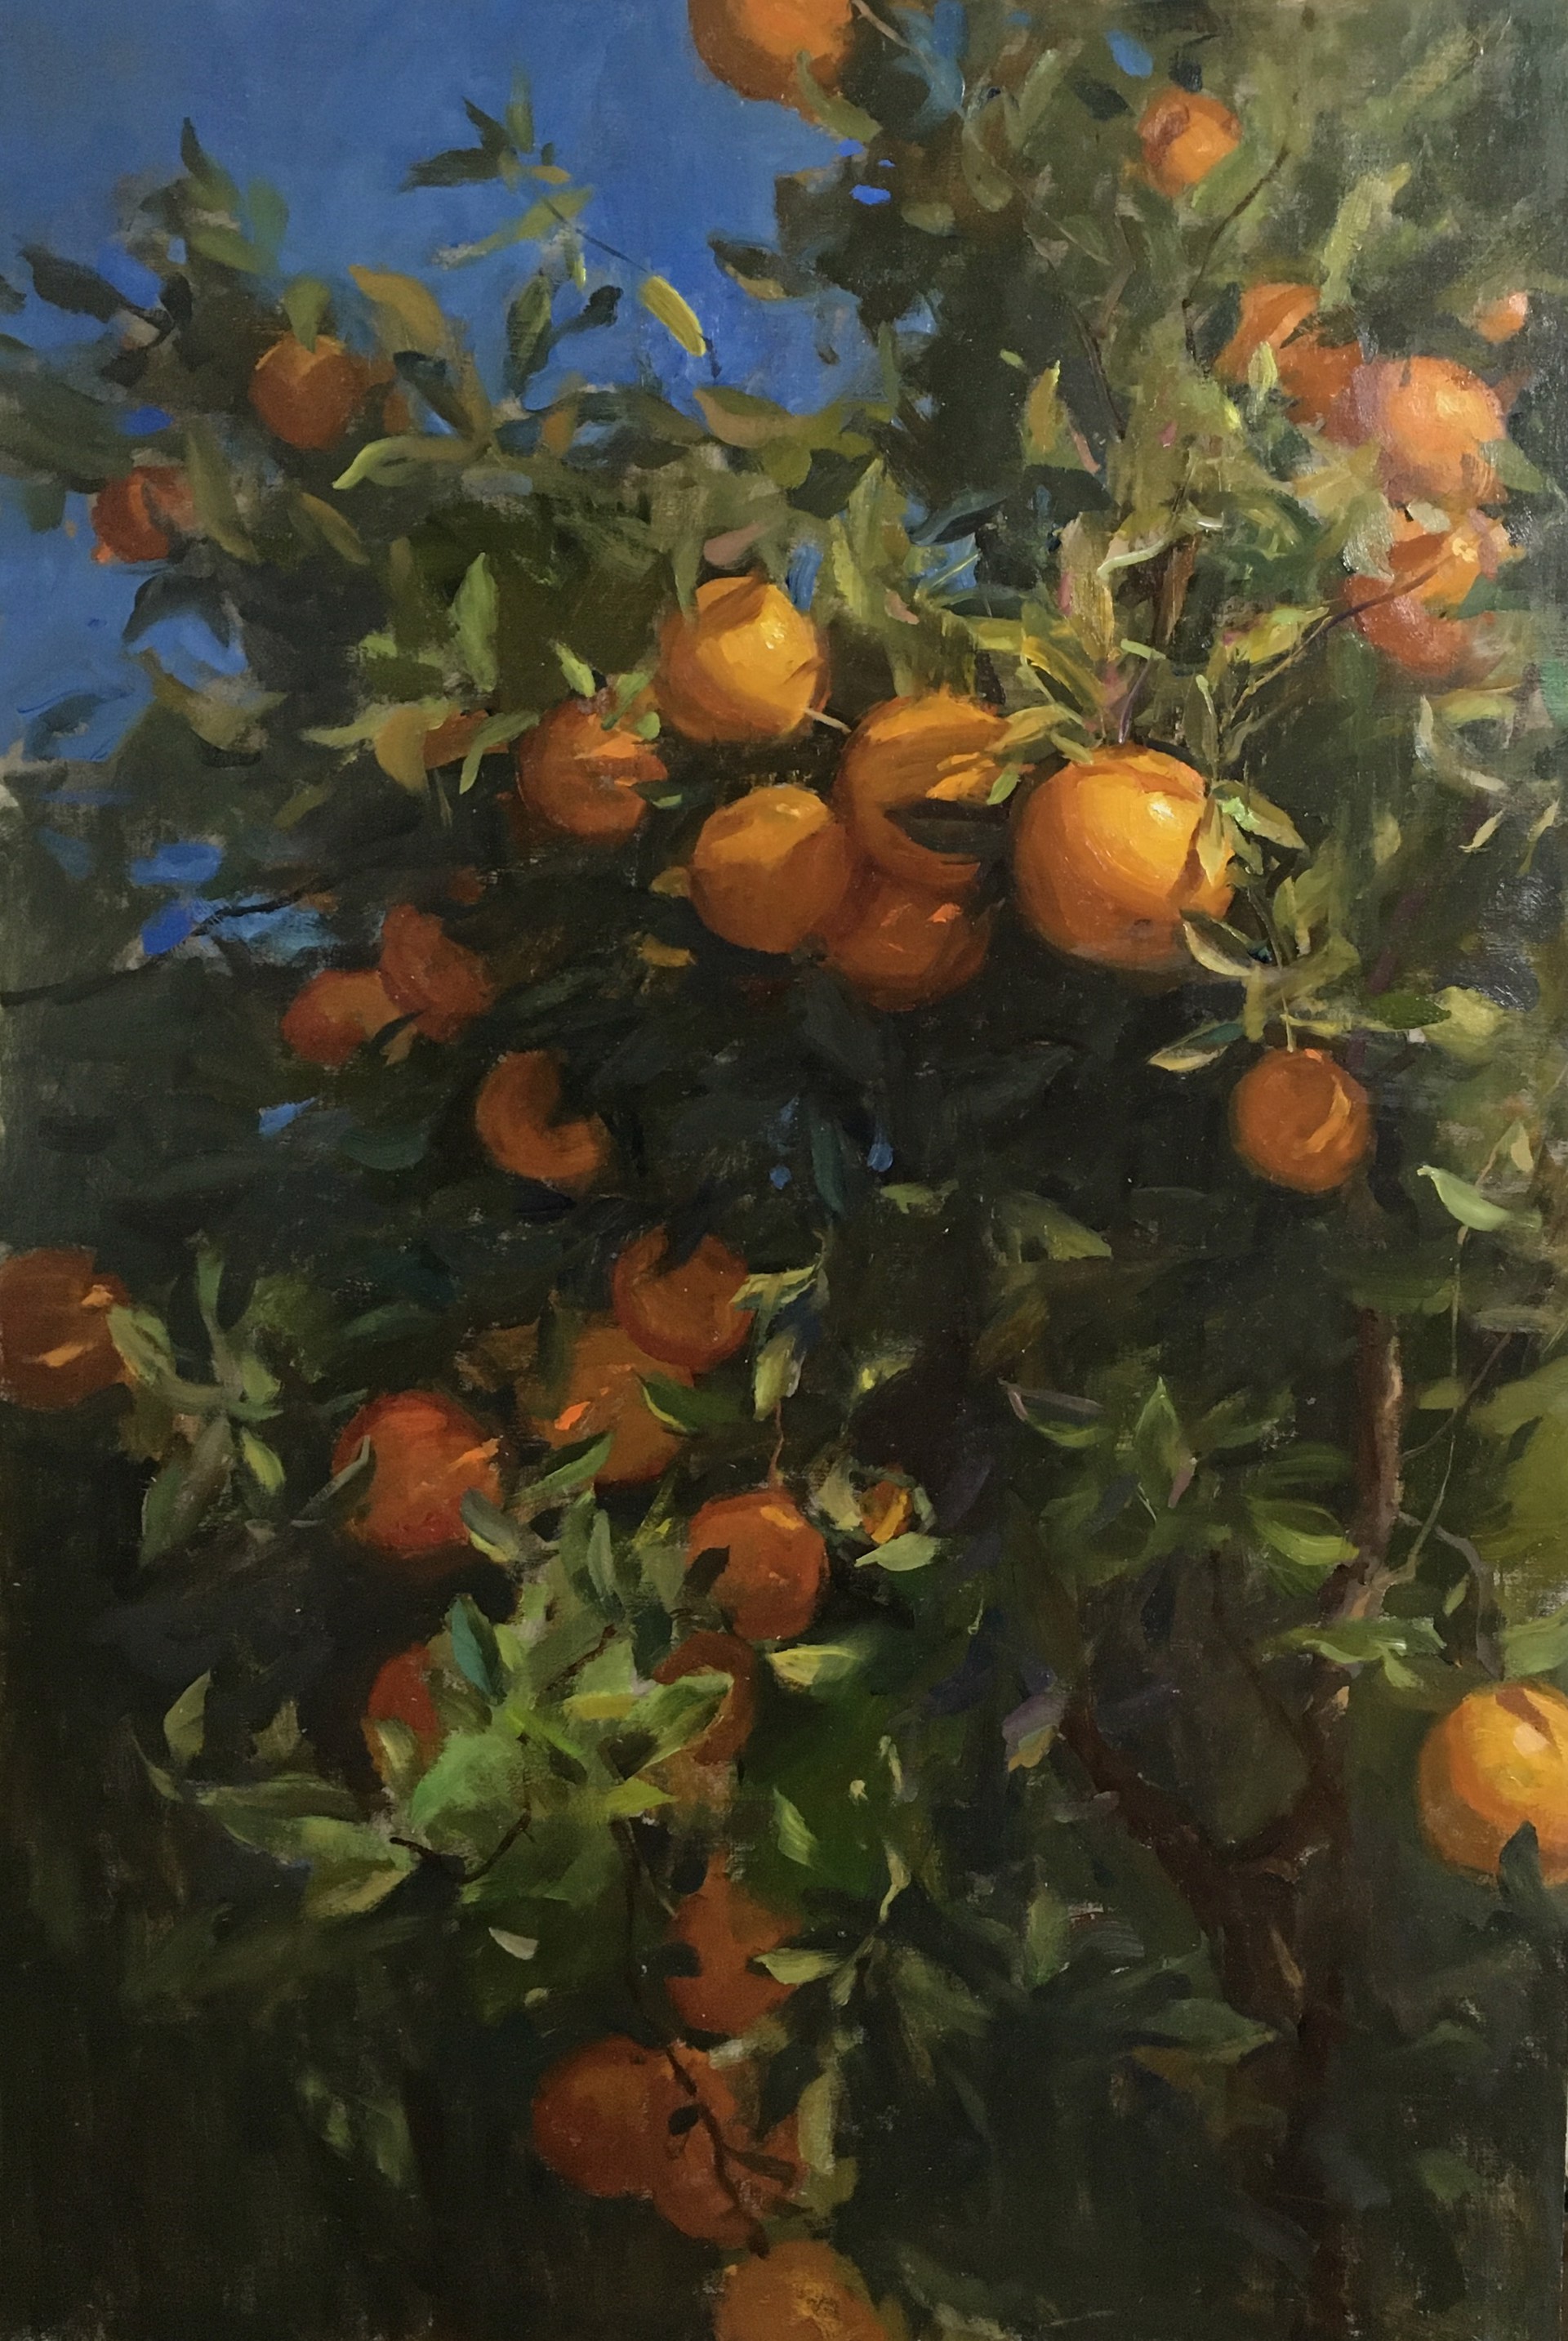 California Oranges by Kyle Ma